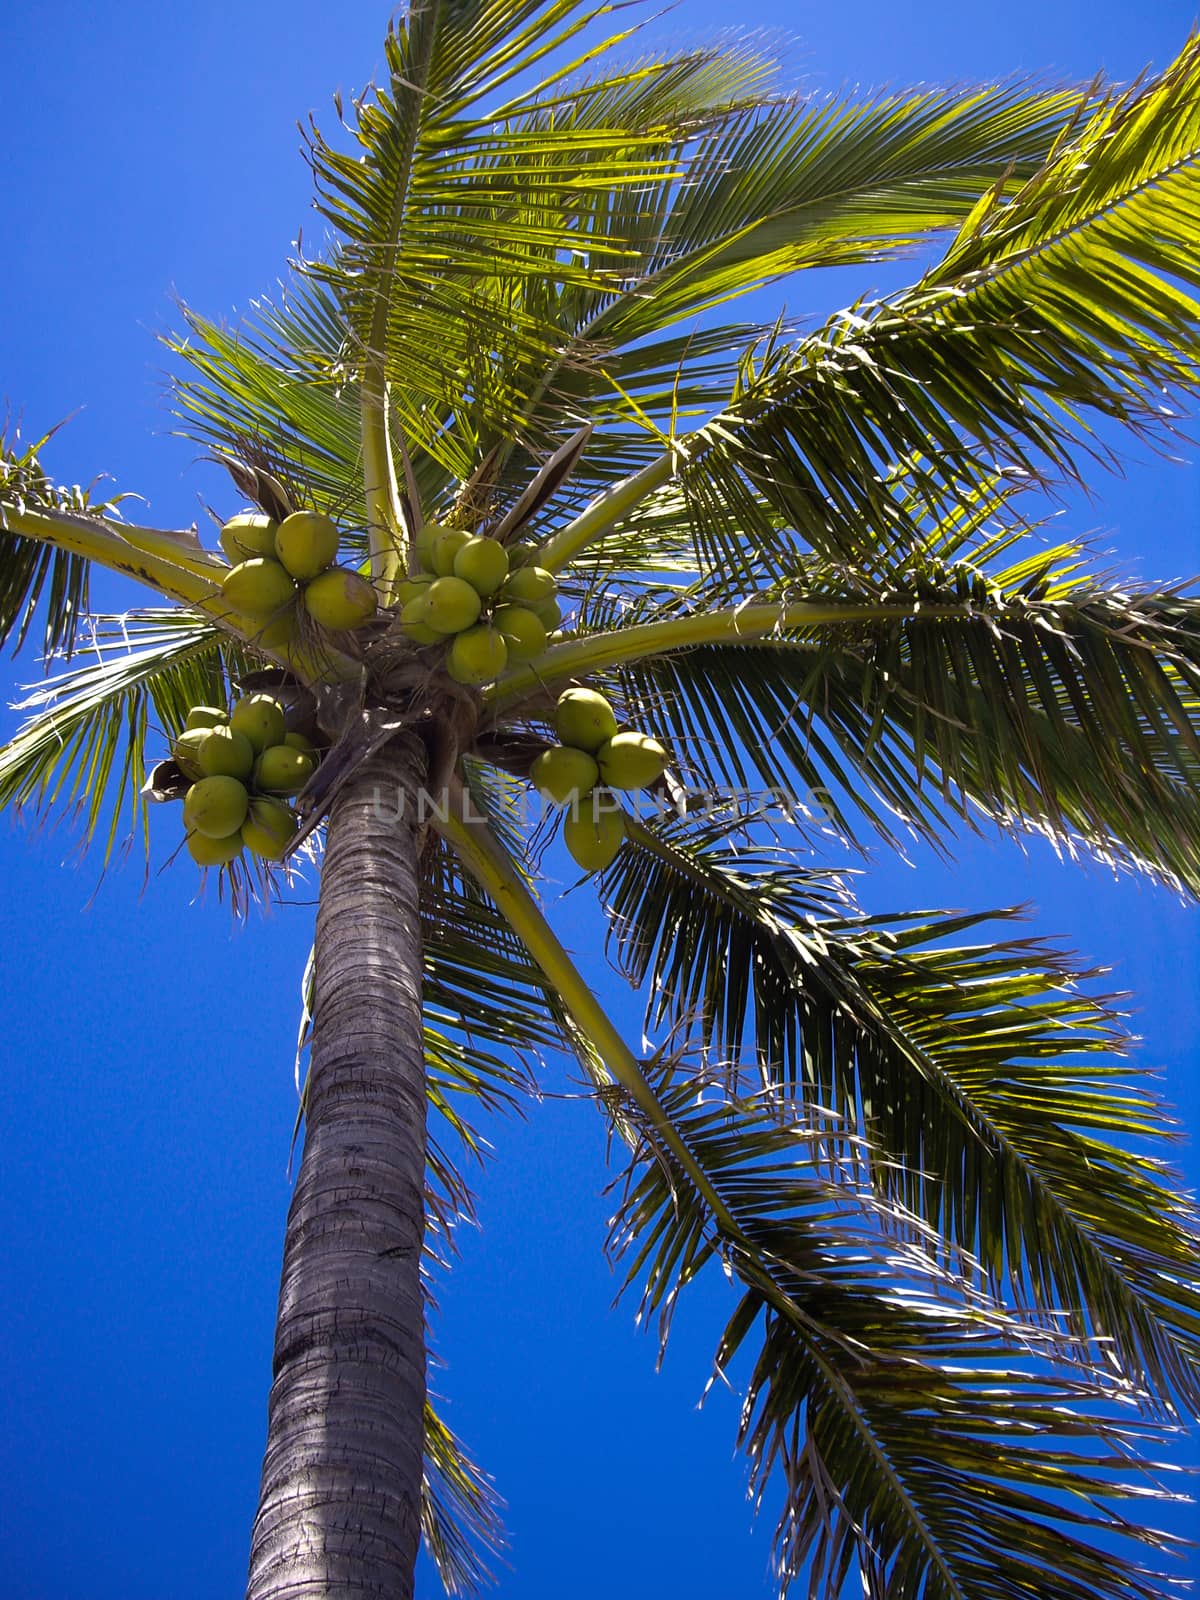 Tropical Coconuts by emattil